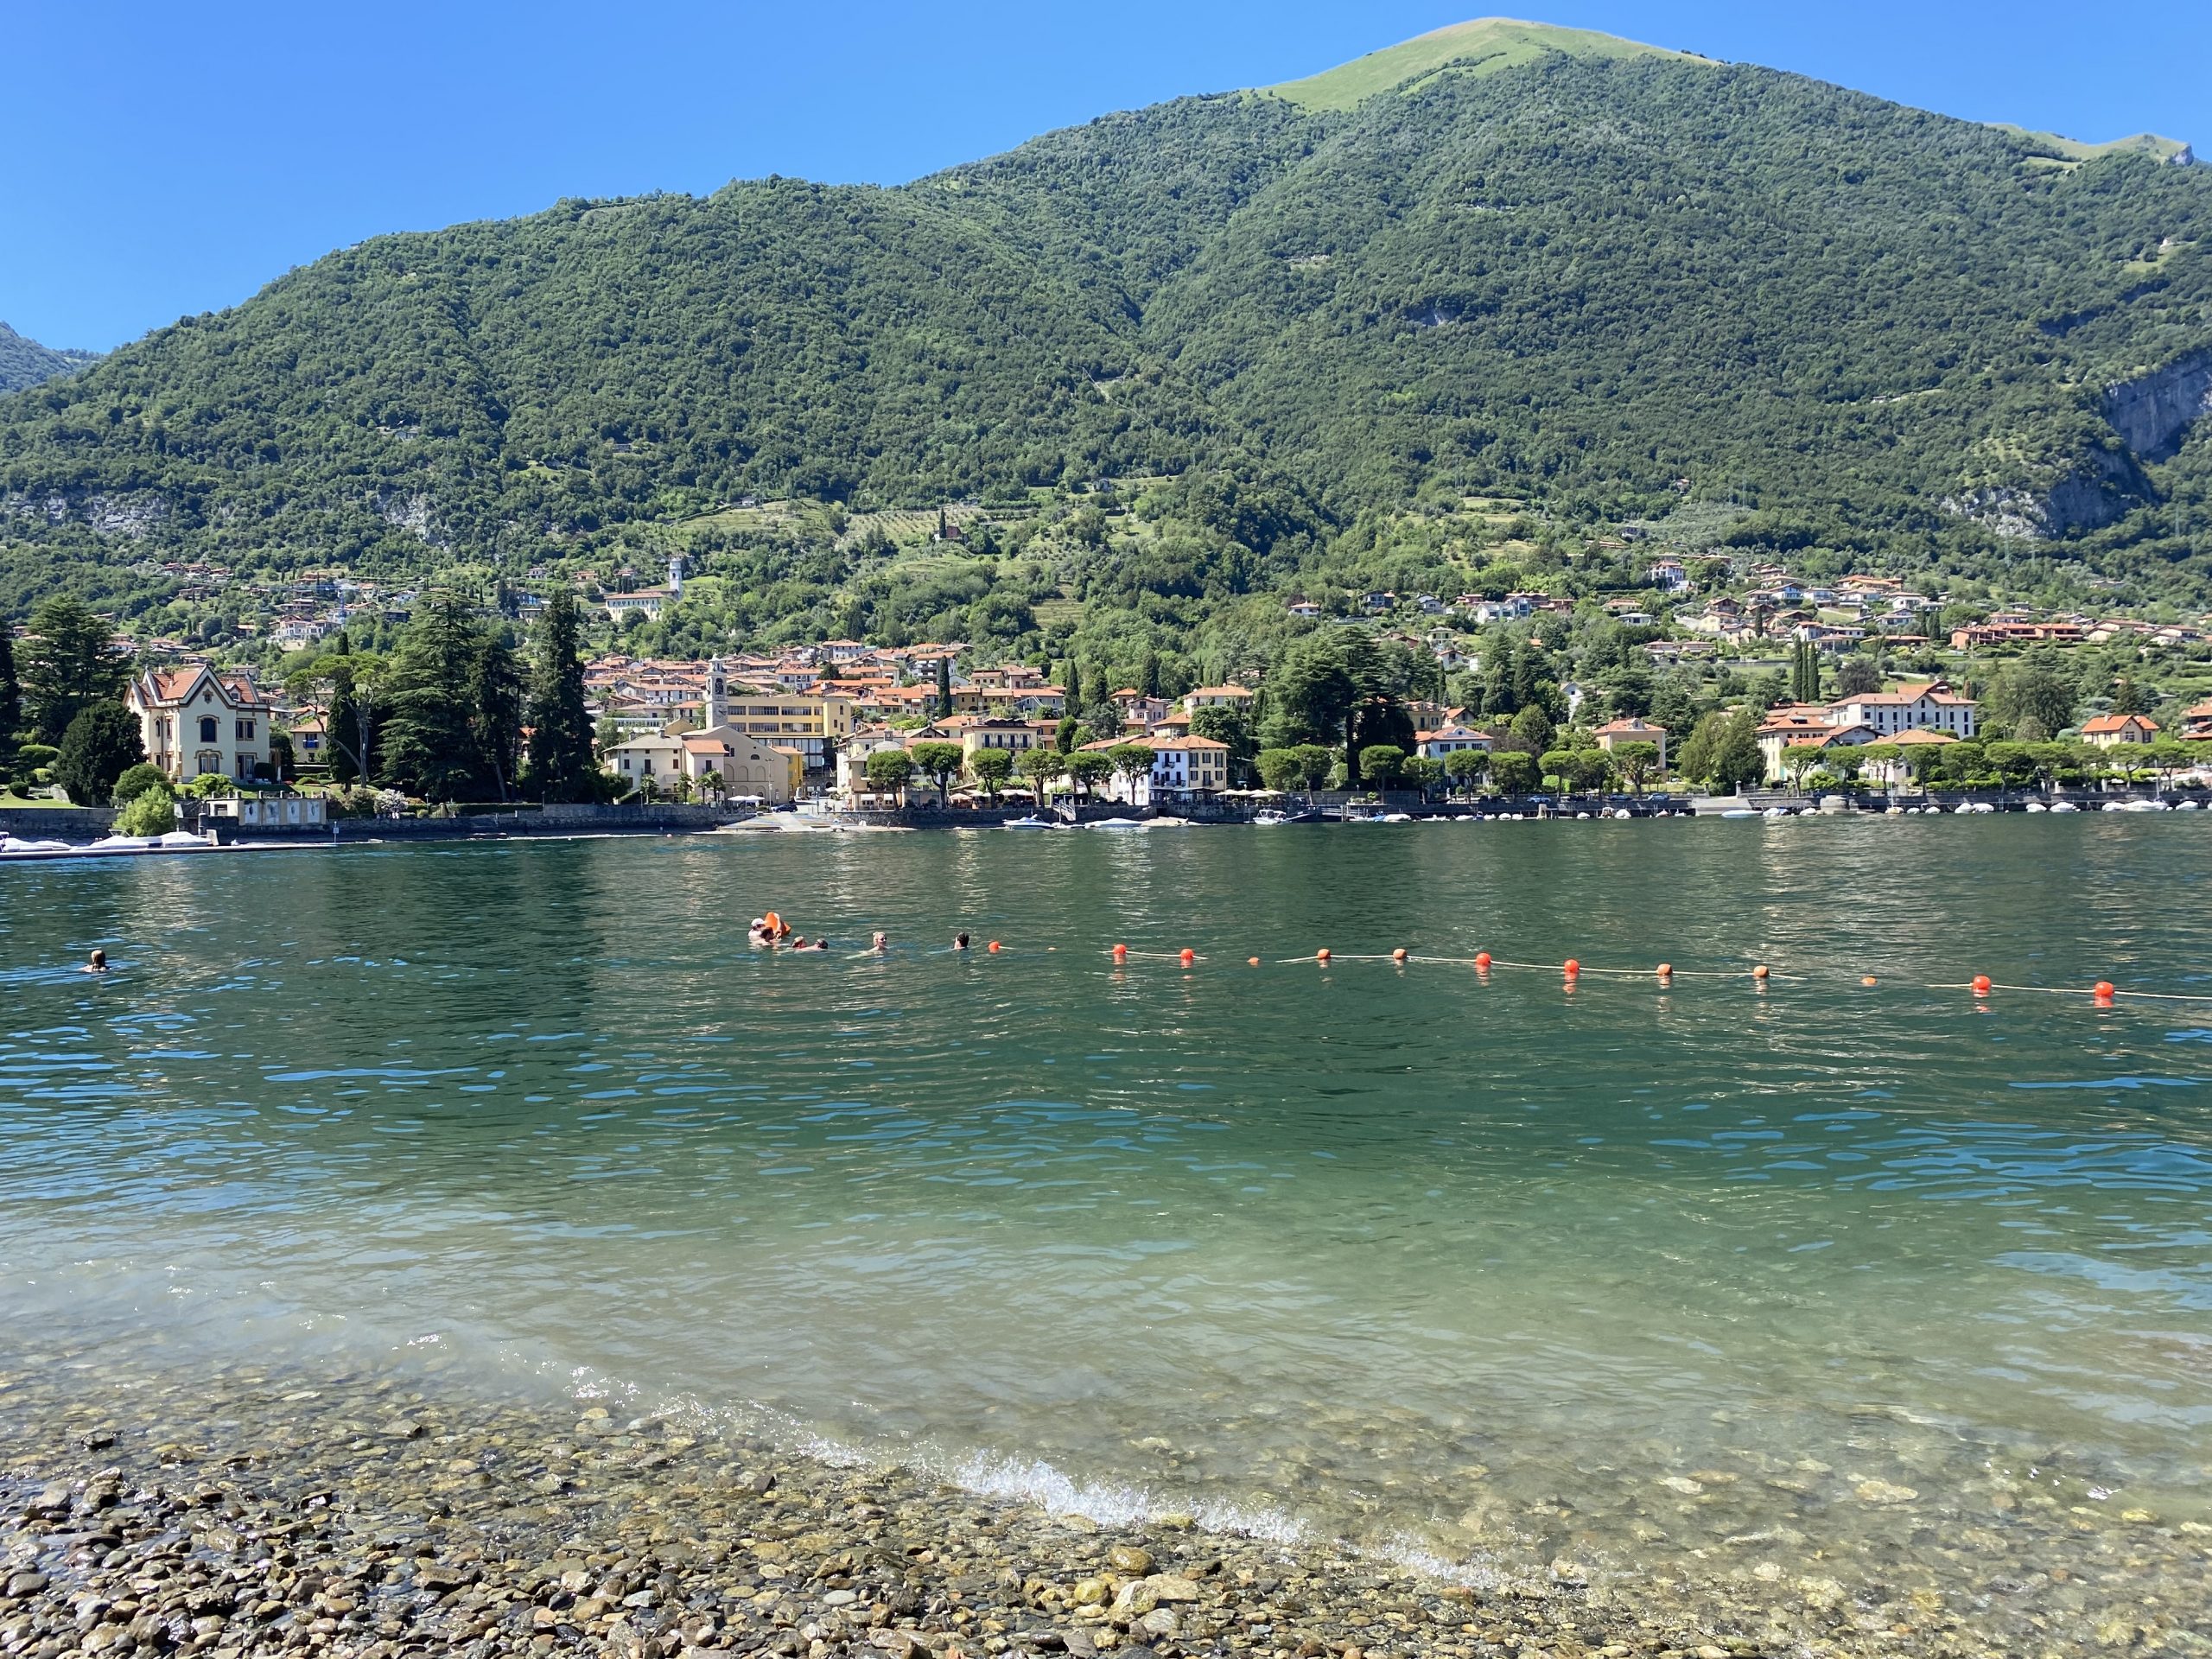 A pebble beach with orange floating buoys in the blue water and people splashing around. An Italian town with orange buildings is behind the lake set below green grassy mountains.